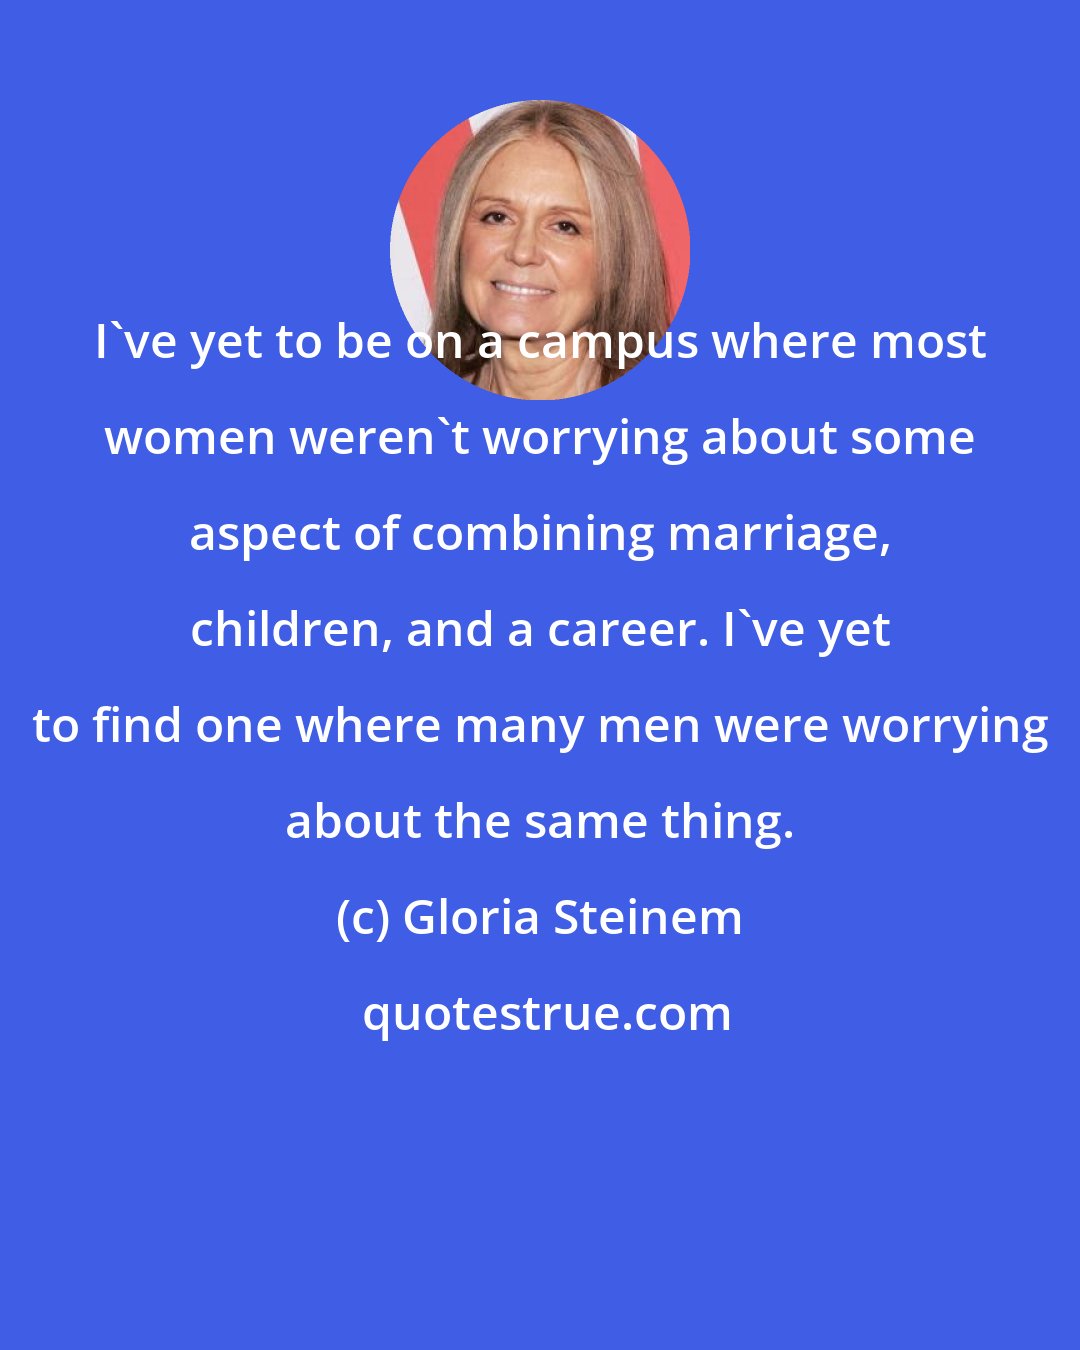 Gloria Steinem: I've yet to be on a campus where most women weren't worrying about some aspect of combining marriage, children, and a career. I've yet to find one where many men were worrying about the same thing.